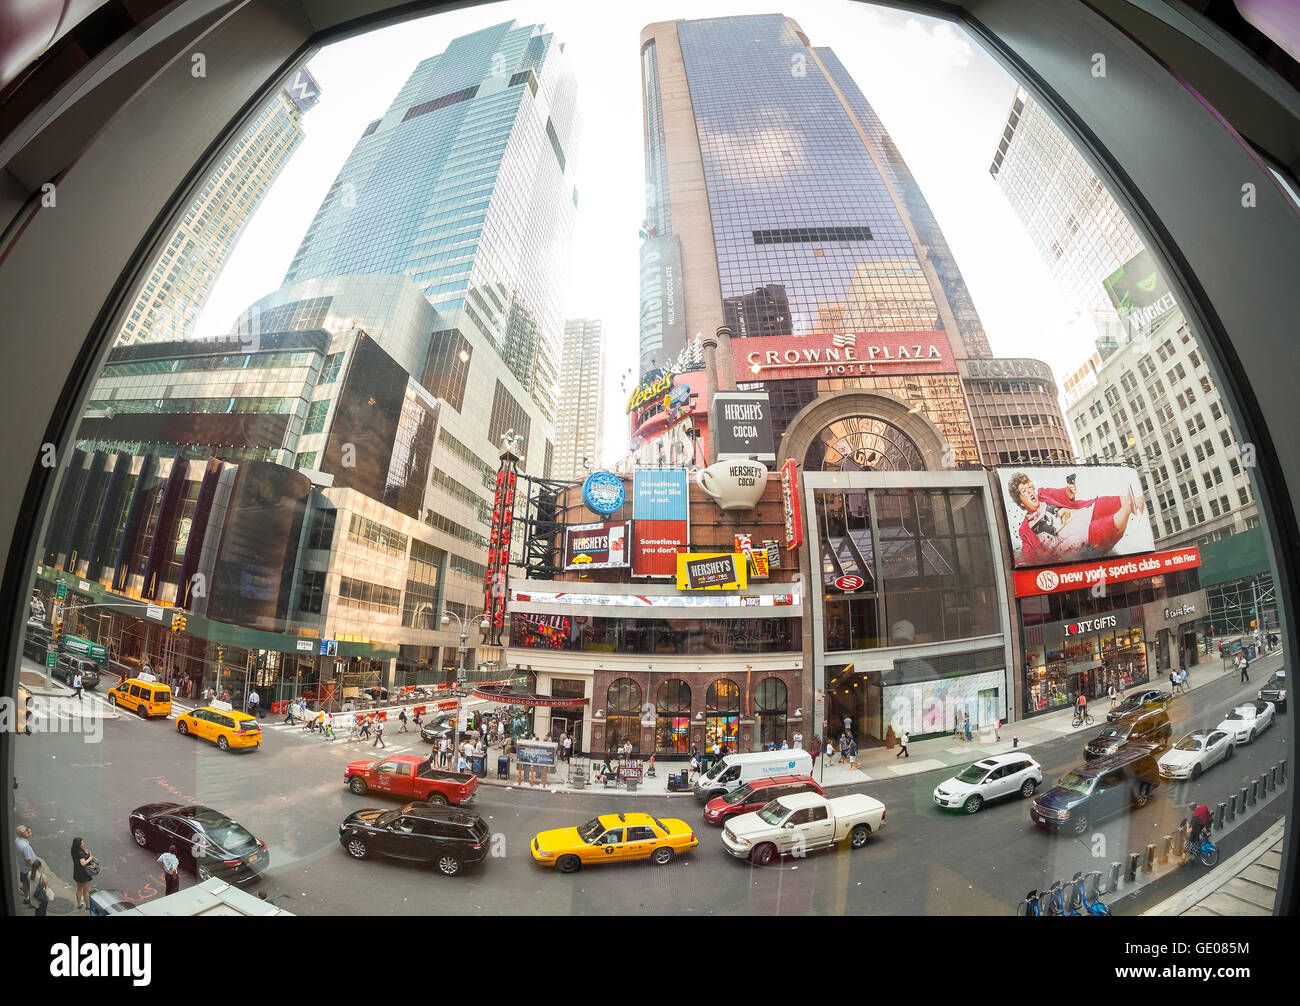 Fisheye lens photo of famous Broadway street, crowded with people and cars. Stock Photo